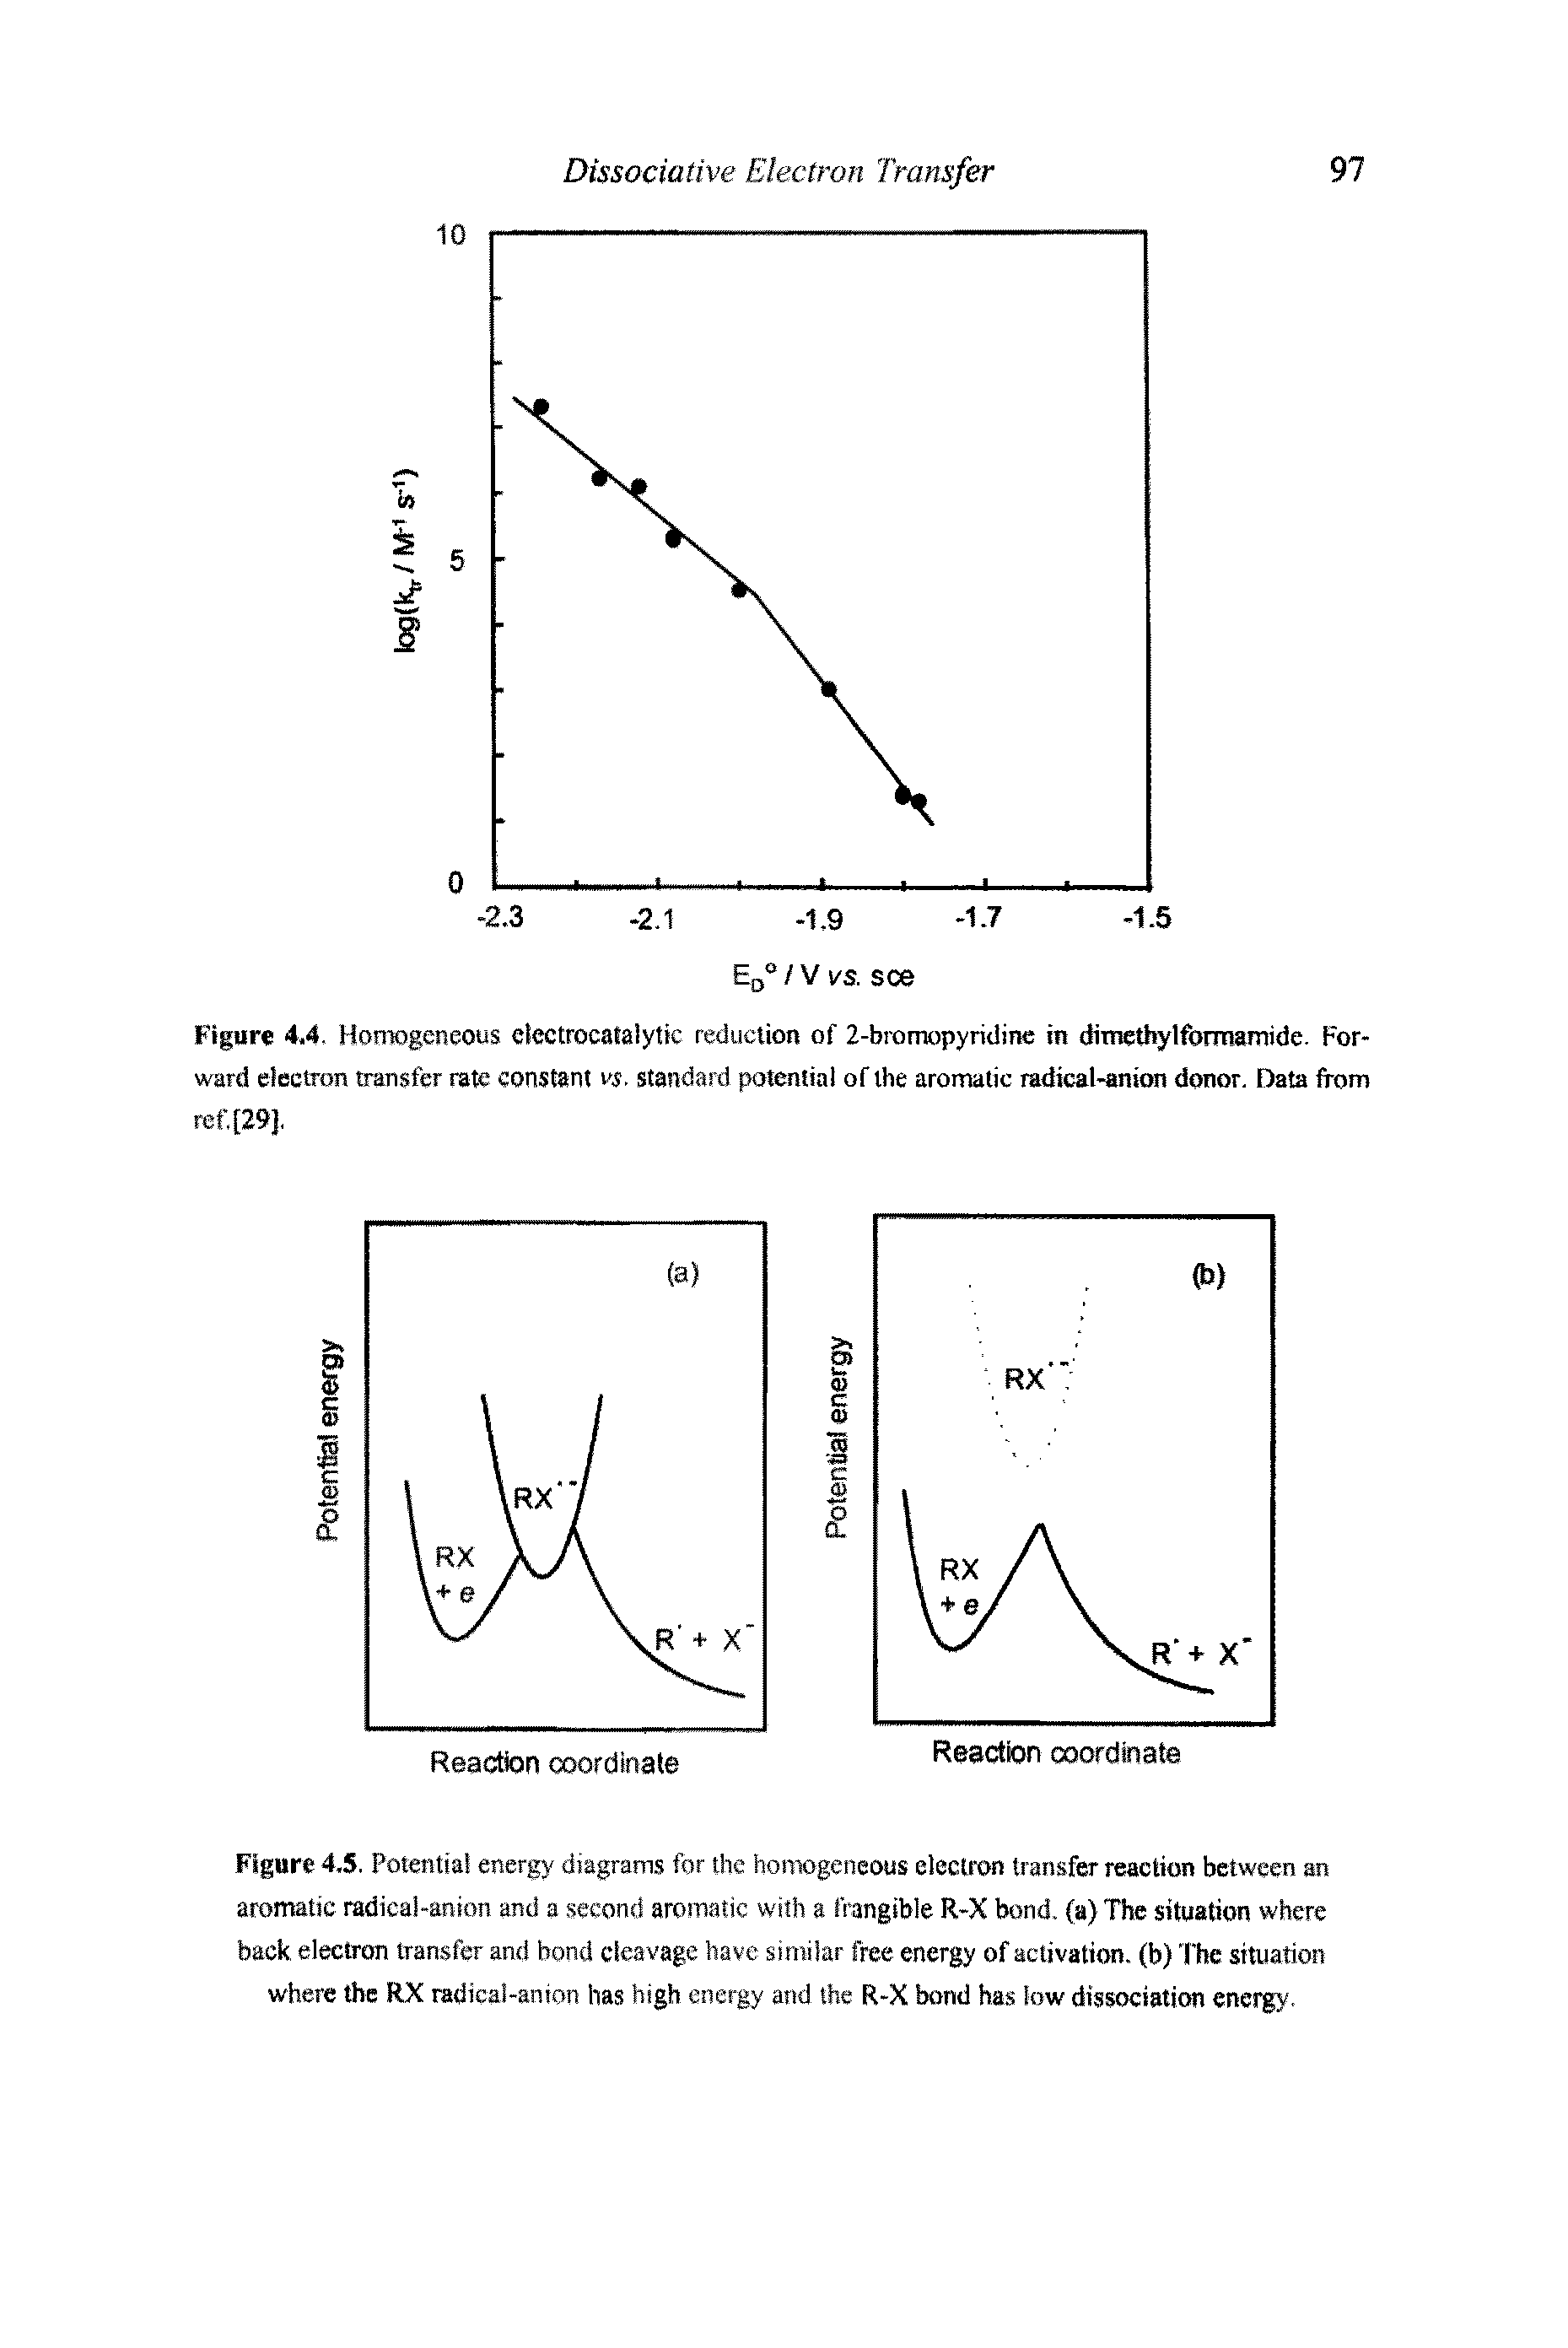 Figure 4.5, Potential energy diagrams for the homogeneous electron transfer reaction between an aromatic radical-anion and a second aromatic with a frangible R-X bond, (a) The situation where back electron transfer and bond cleavage have similar free energy of activation, (b) The situation where the RX radical-anicm has high energy and the R-X bond has low dissociation ertergy.